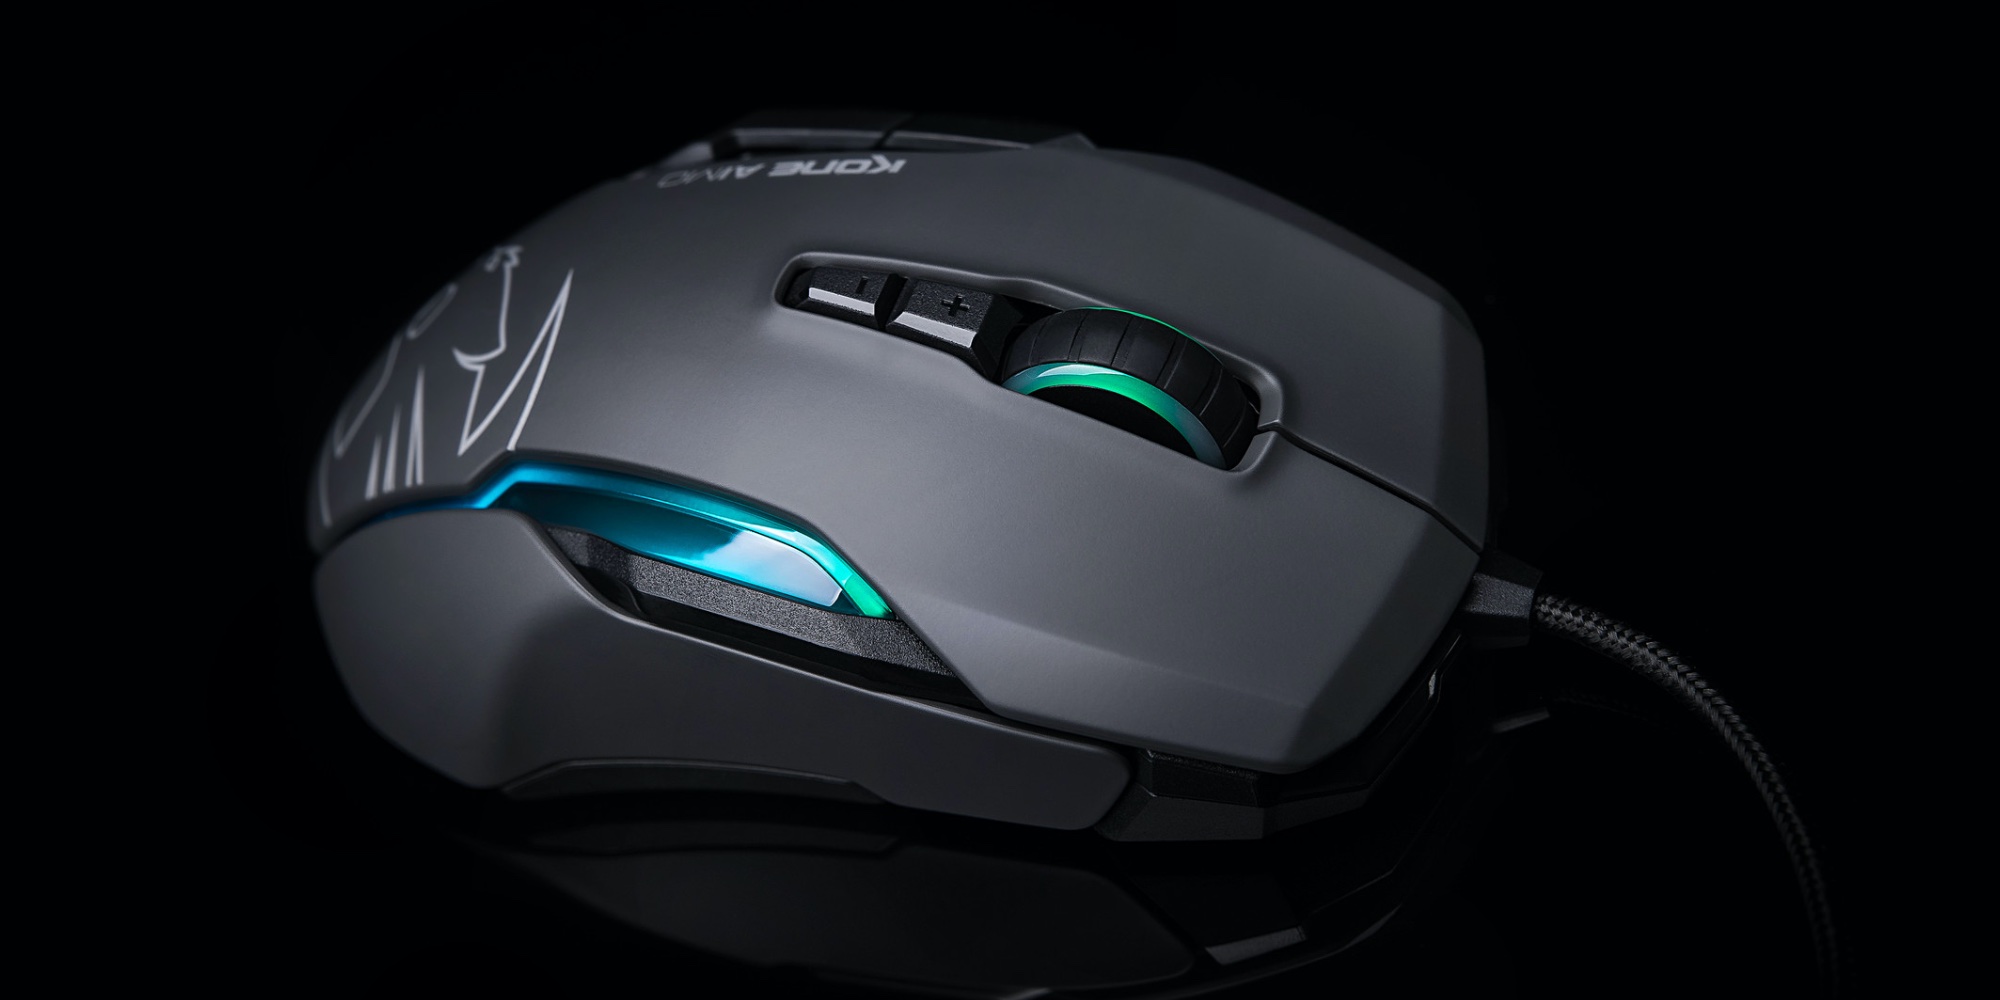 An All Time Low Awaits On Roccat S Kone Aimo Rgb Gaming Mouse At 50 38 Off 9to5toys